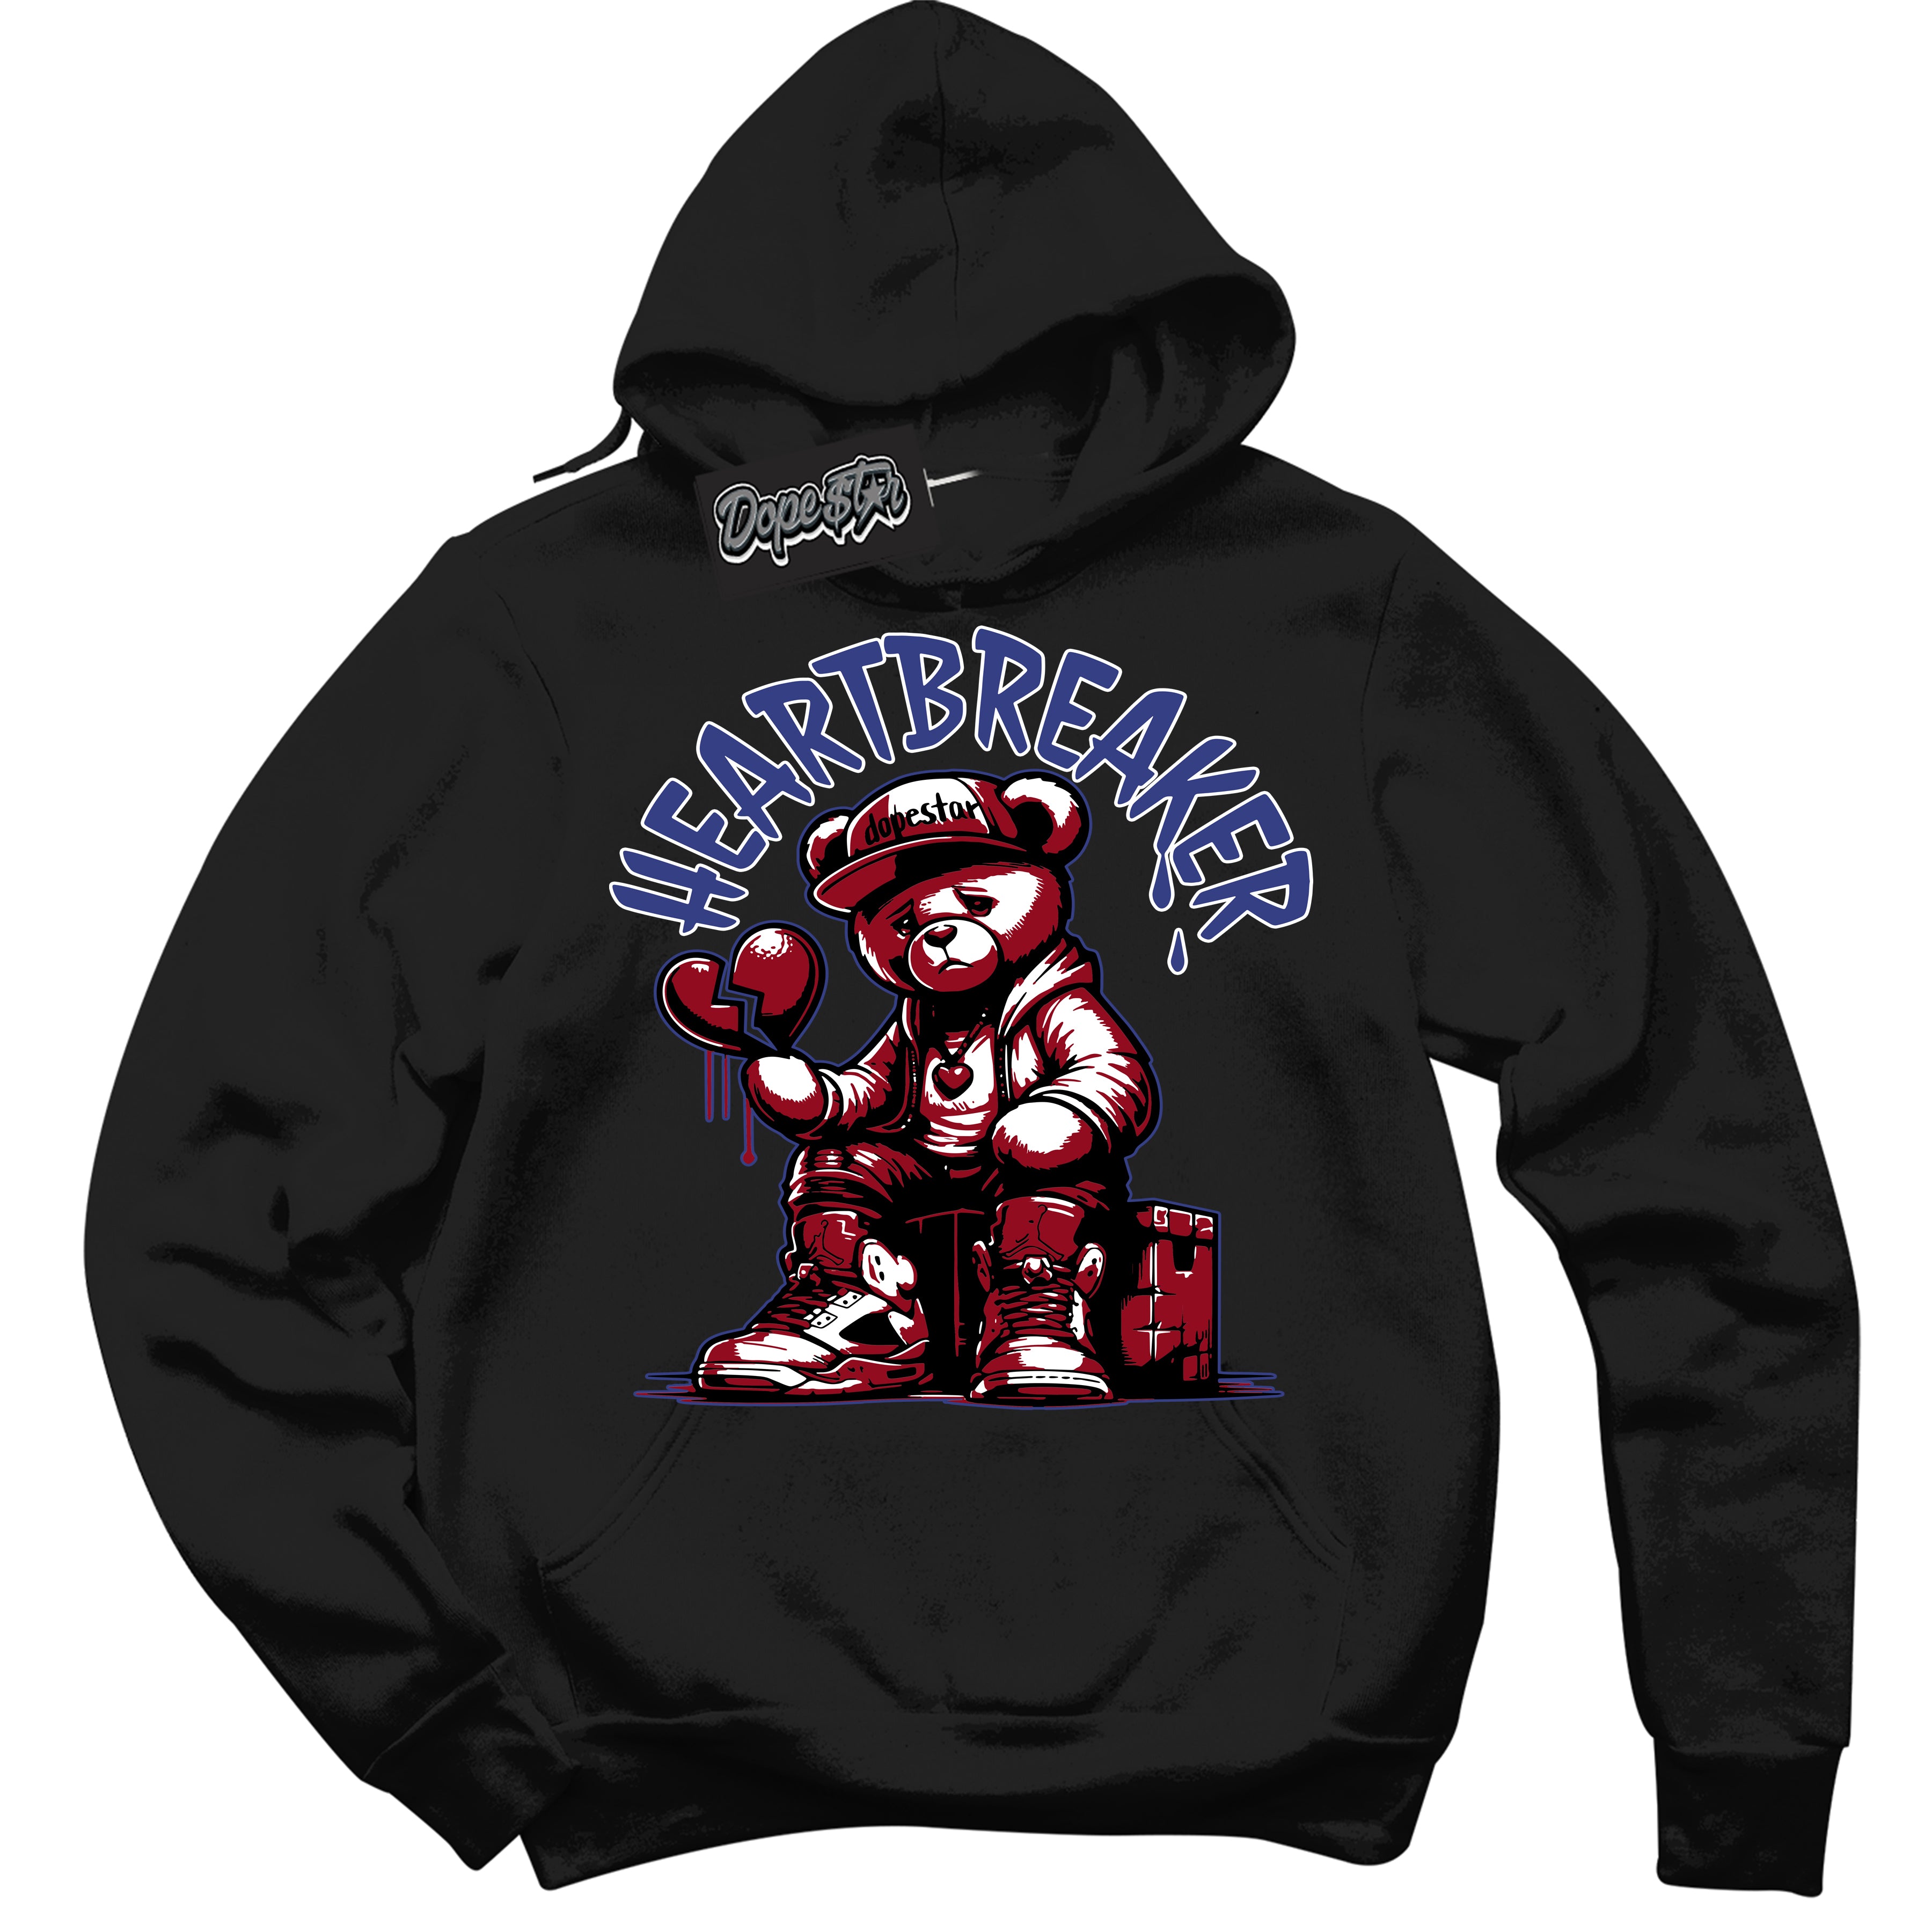 Cool Black Hoodie with “ Heartbreaker Bear ”  design that Perfectly Matches Playoffs 8s Sneakers.